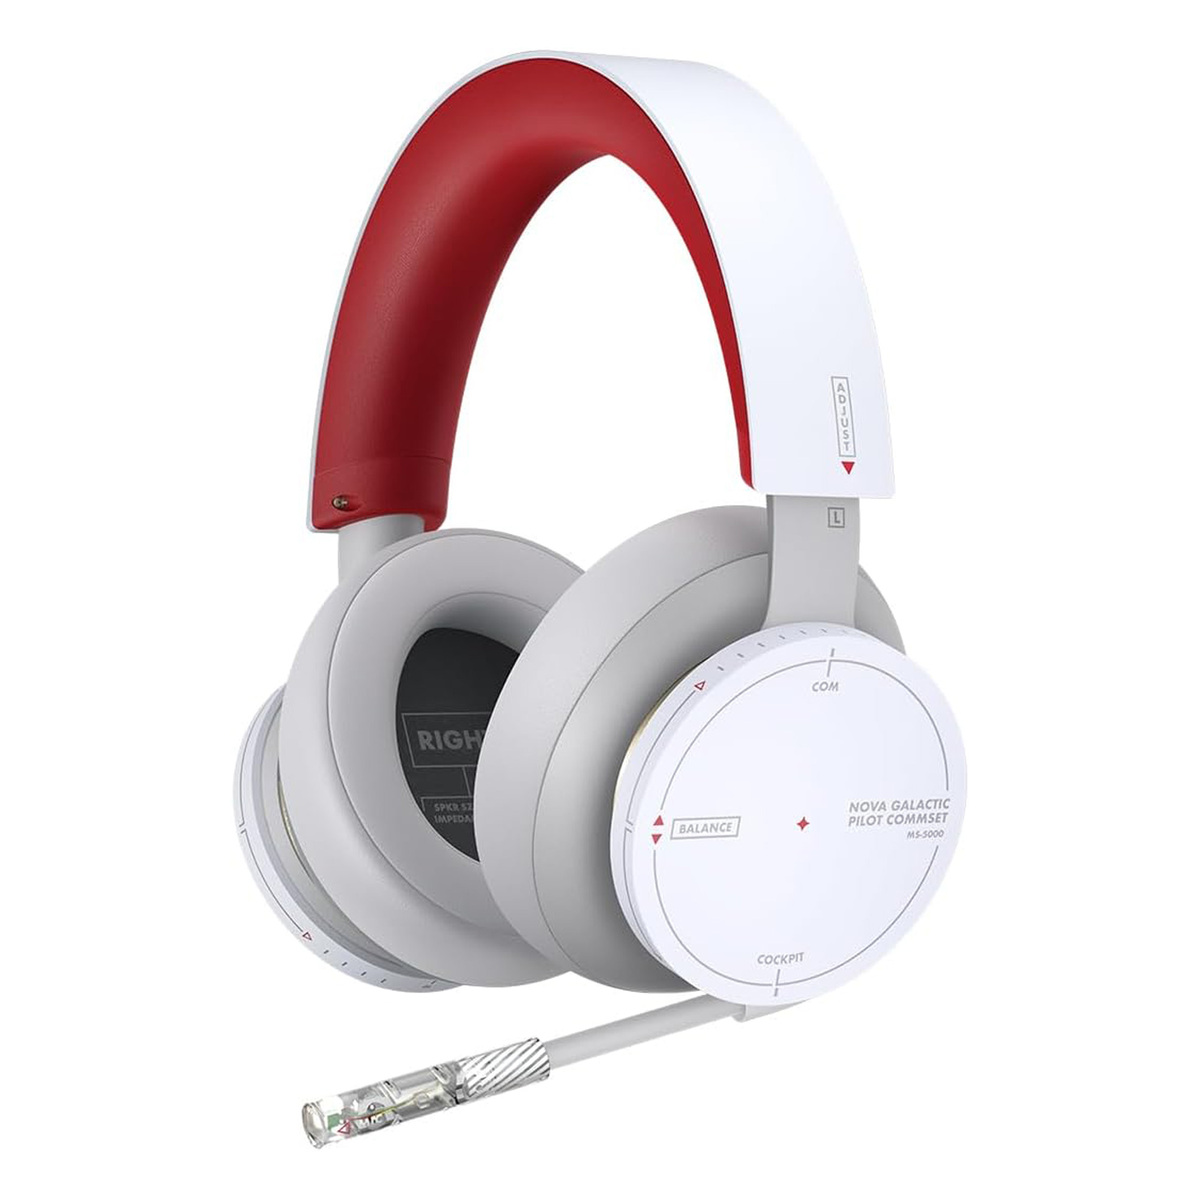 Xbox Wireless Headset - Starfield Limited Edition, Red/White, TLL-00017